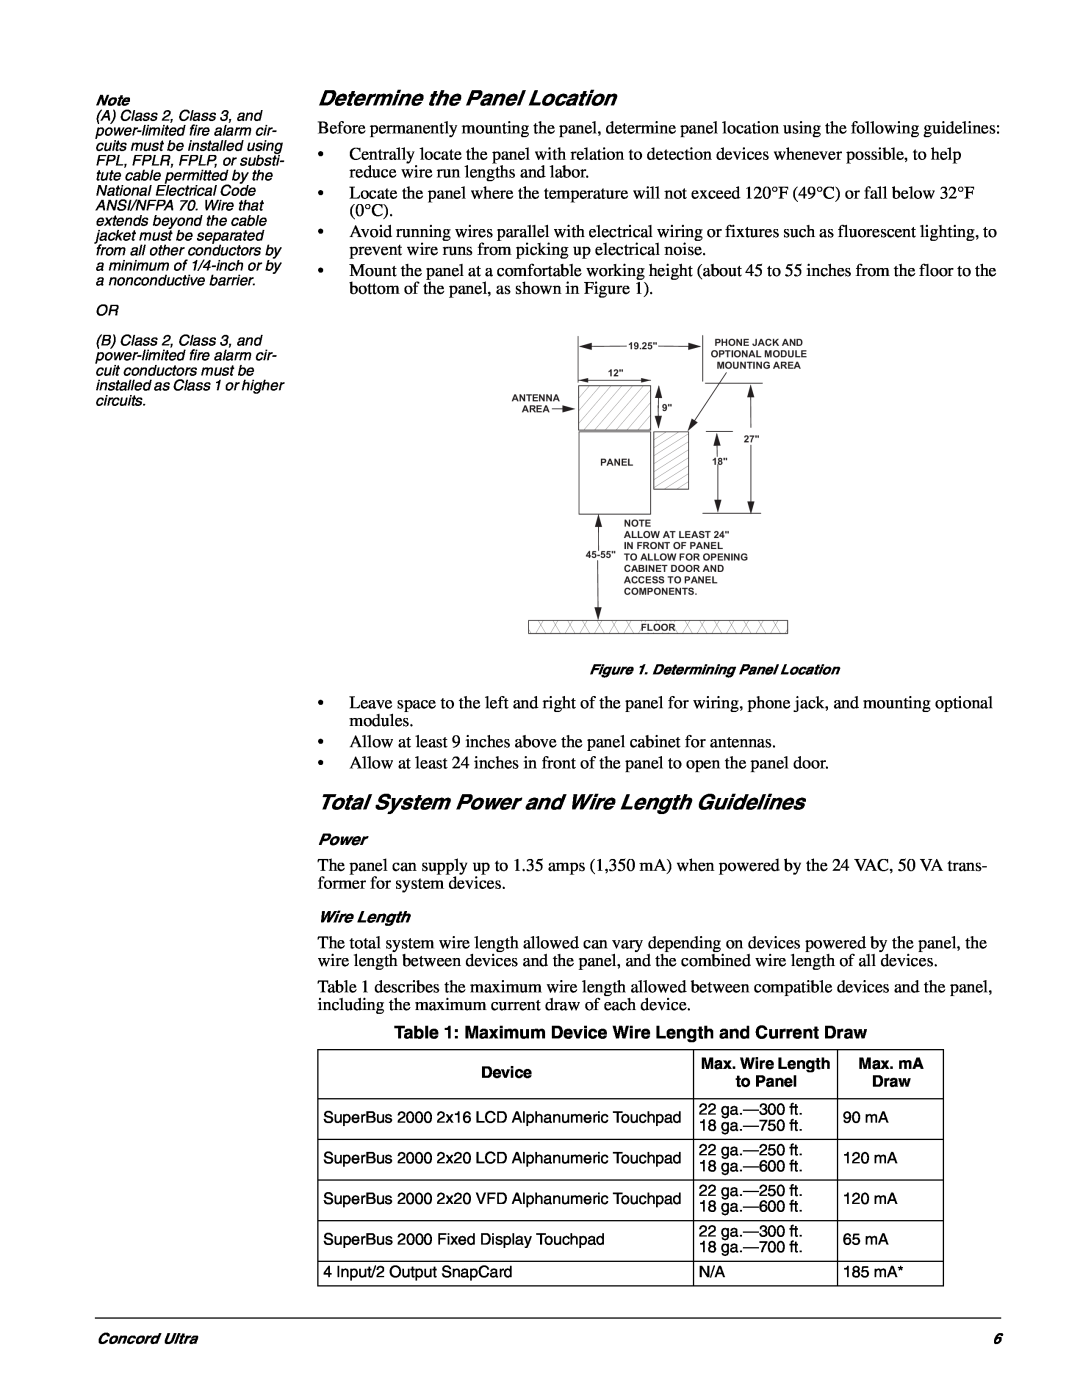 GE 60-960-95 installation instructions Determine the Panel Location, Total System Power and Wire Length Guidelines 